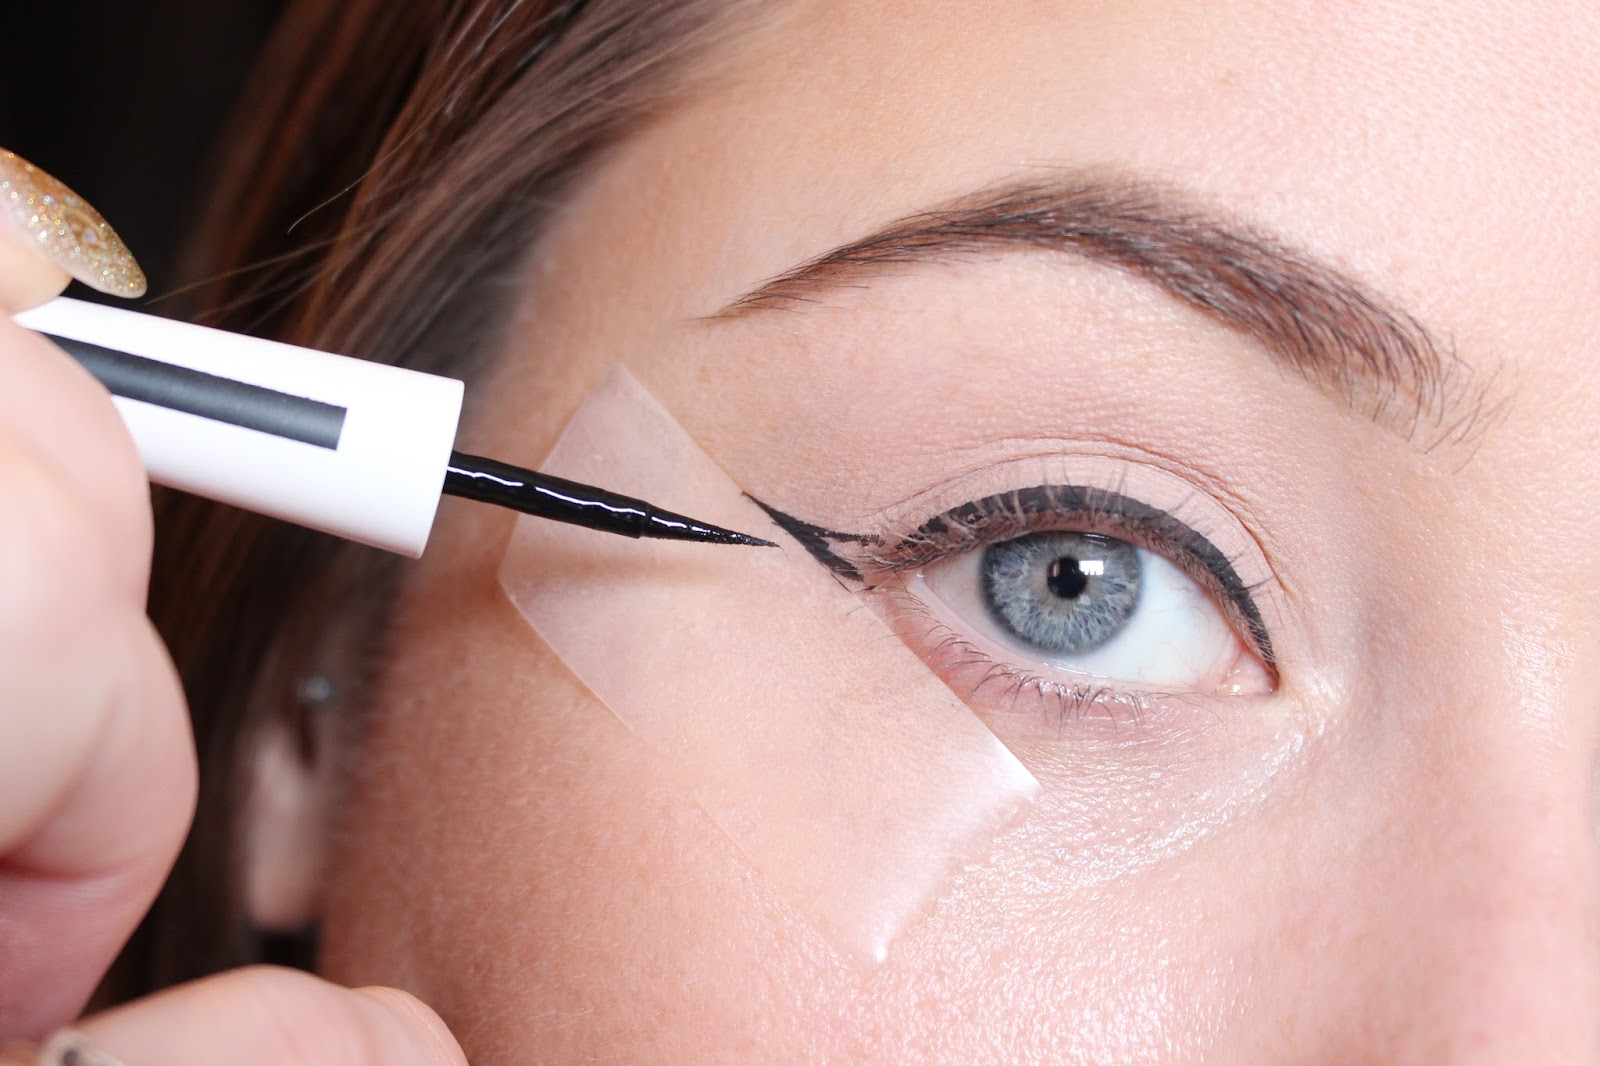 Makeup Tape Eyes The Sticky Trick For Perfect Winged Eyeliner British Beauty Addict